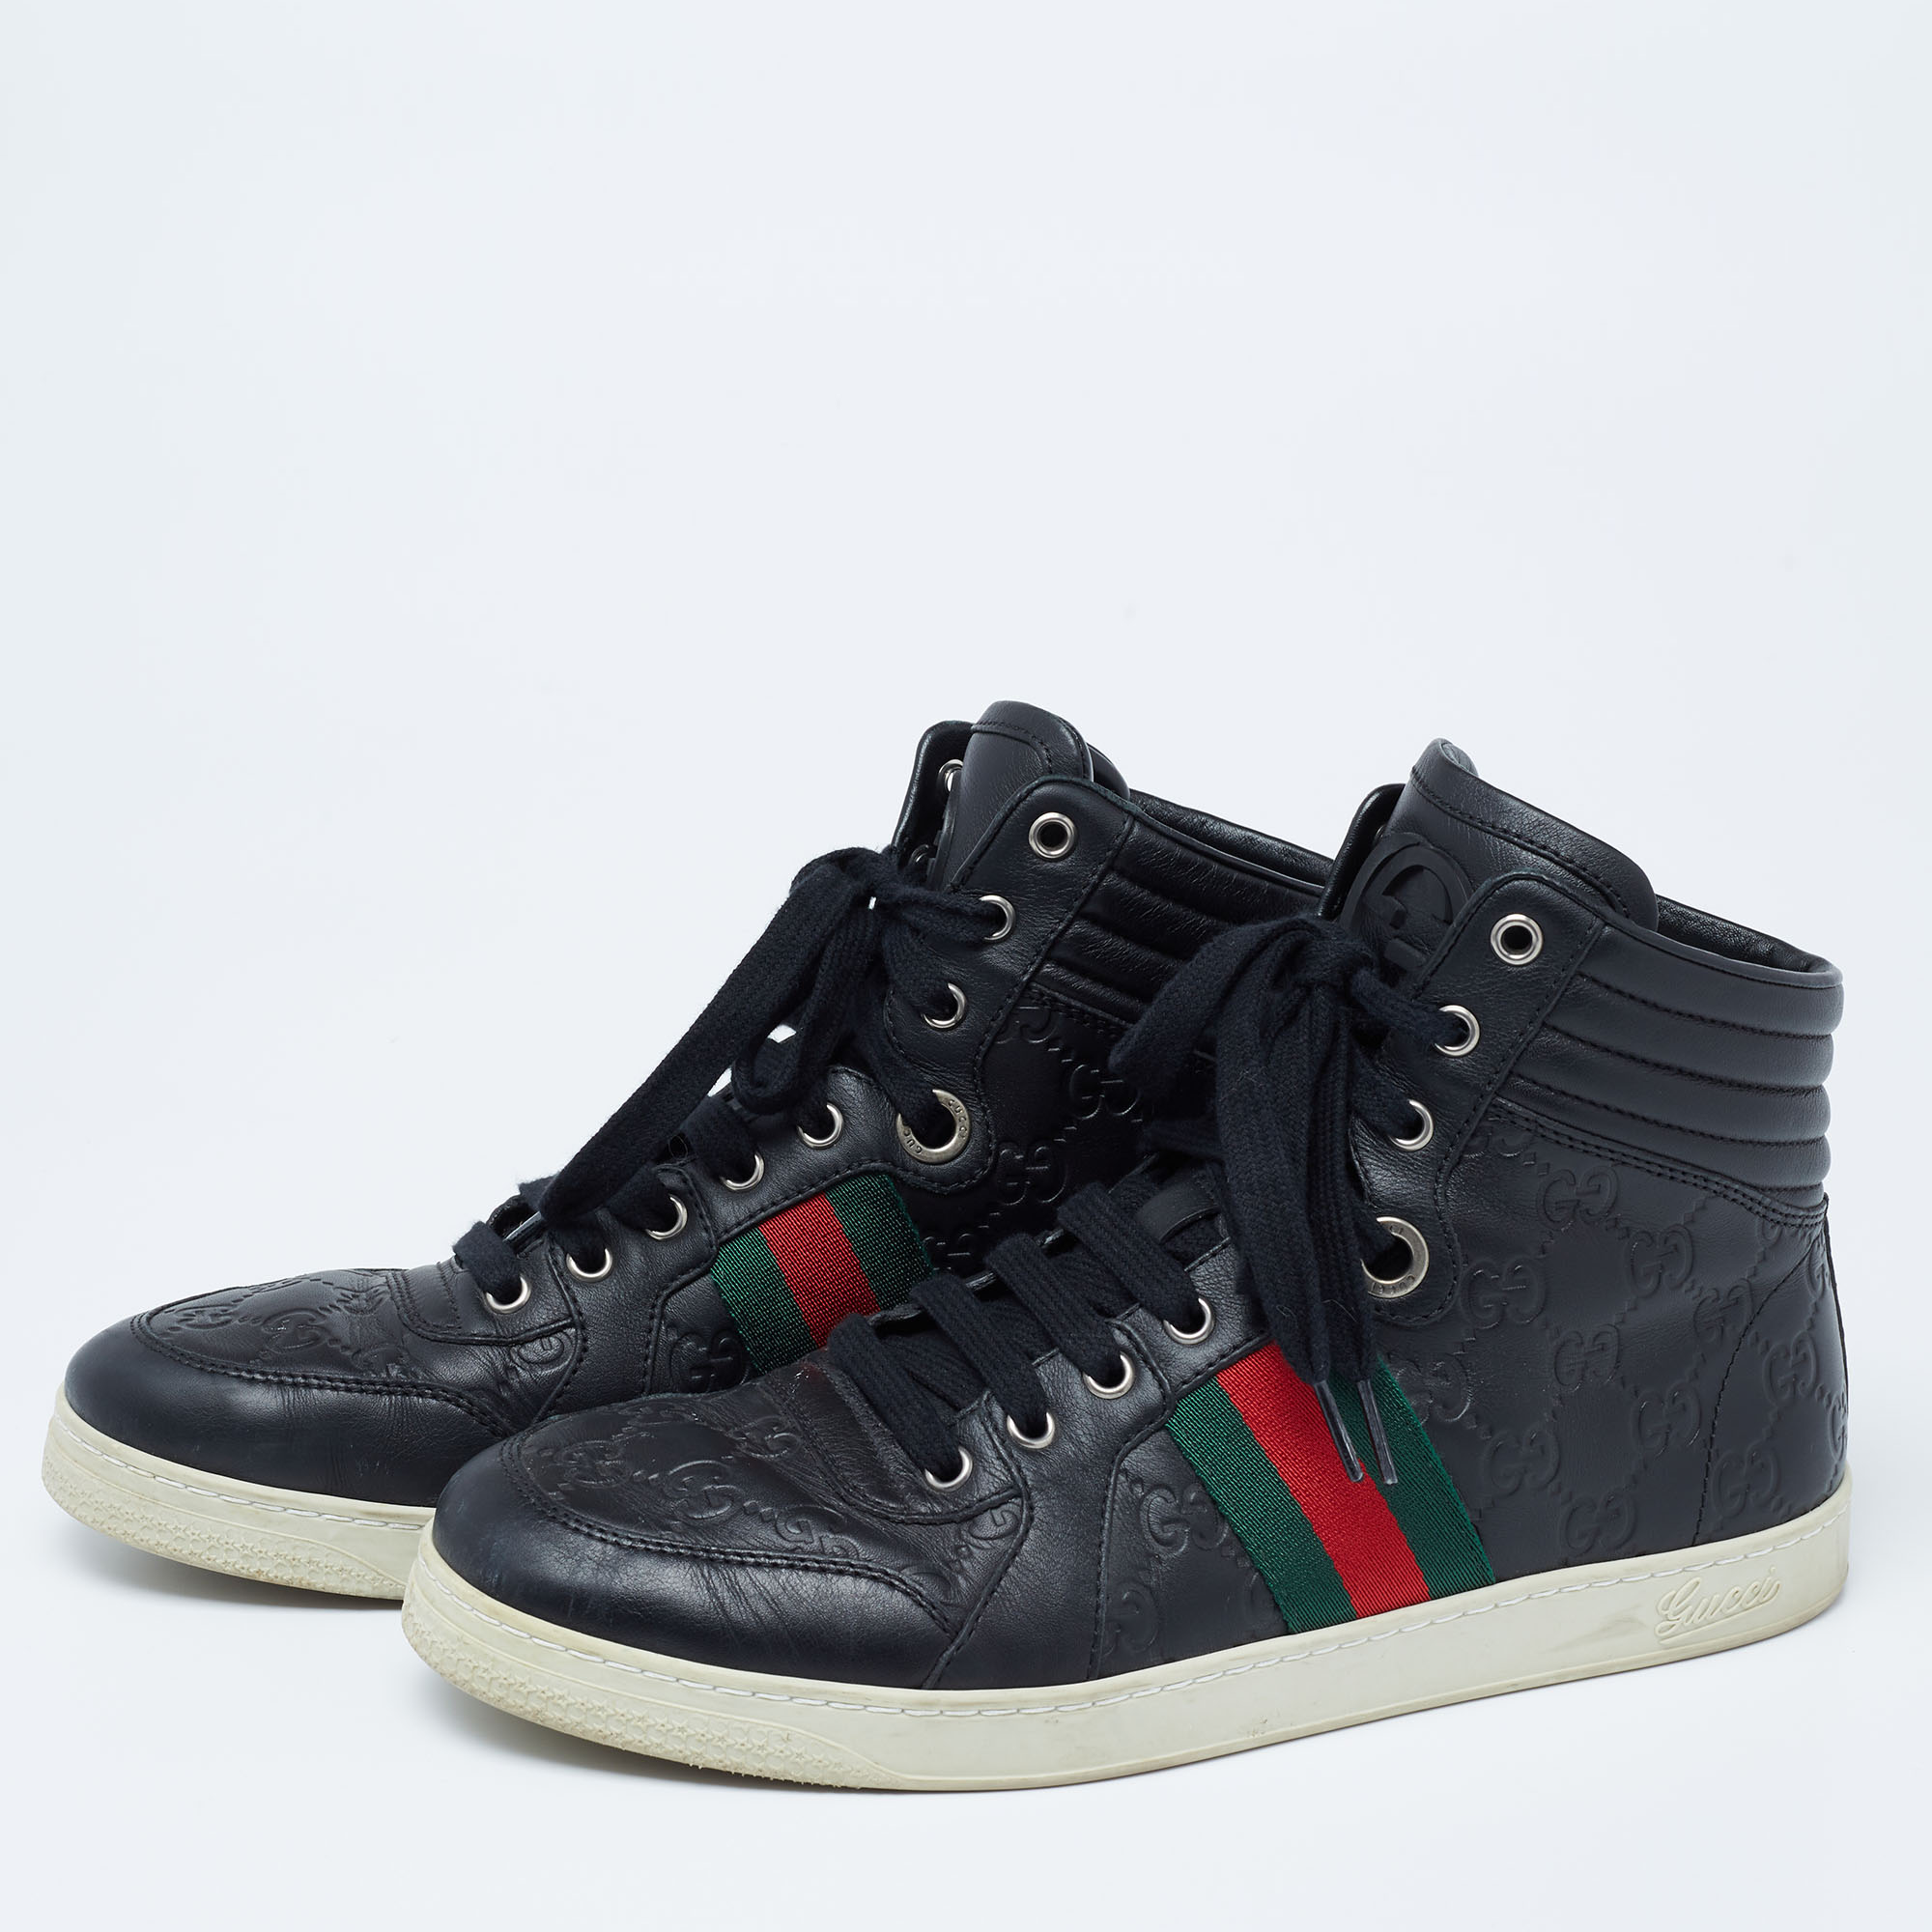 

Gucci Black Guccissima Leather Web Detail High-Top Sneakers Size